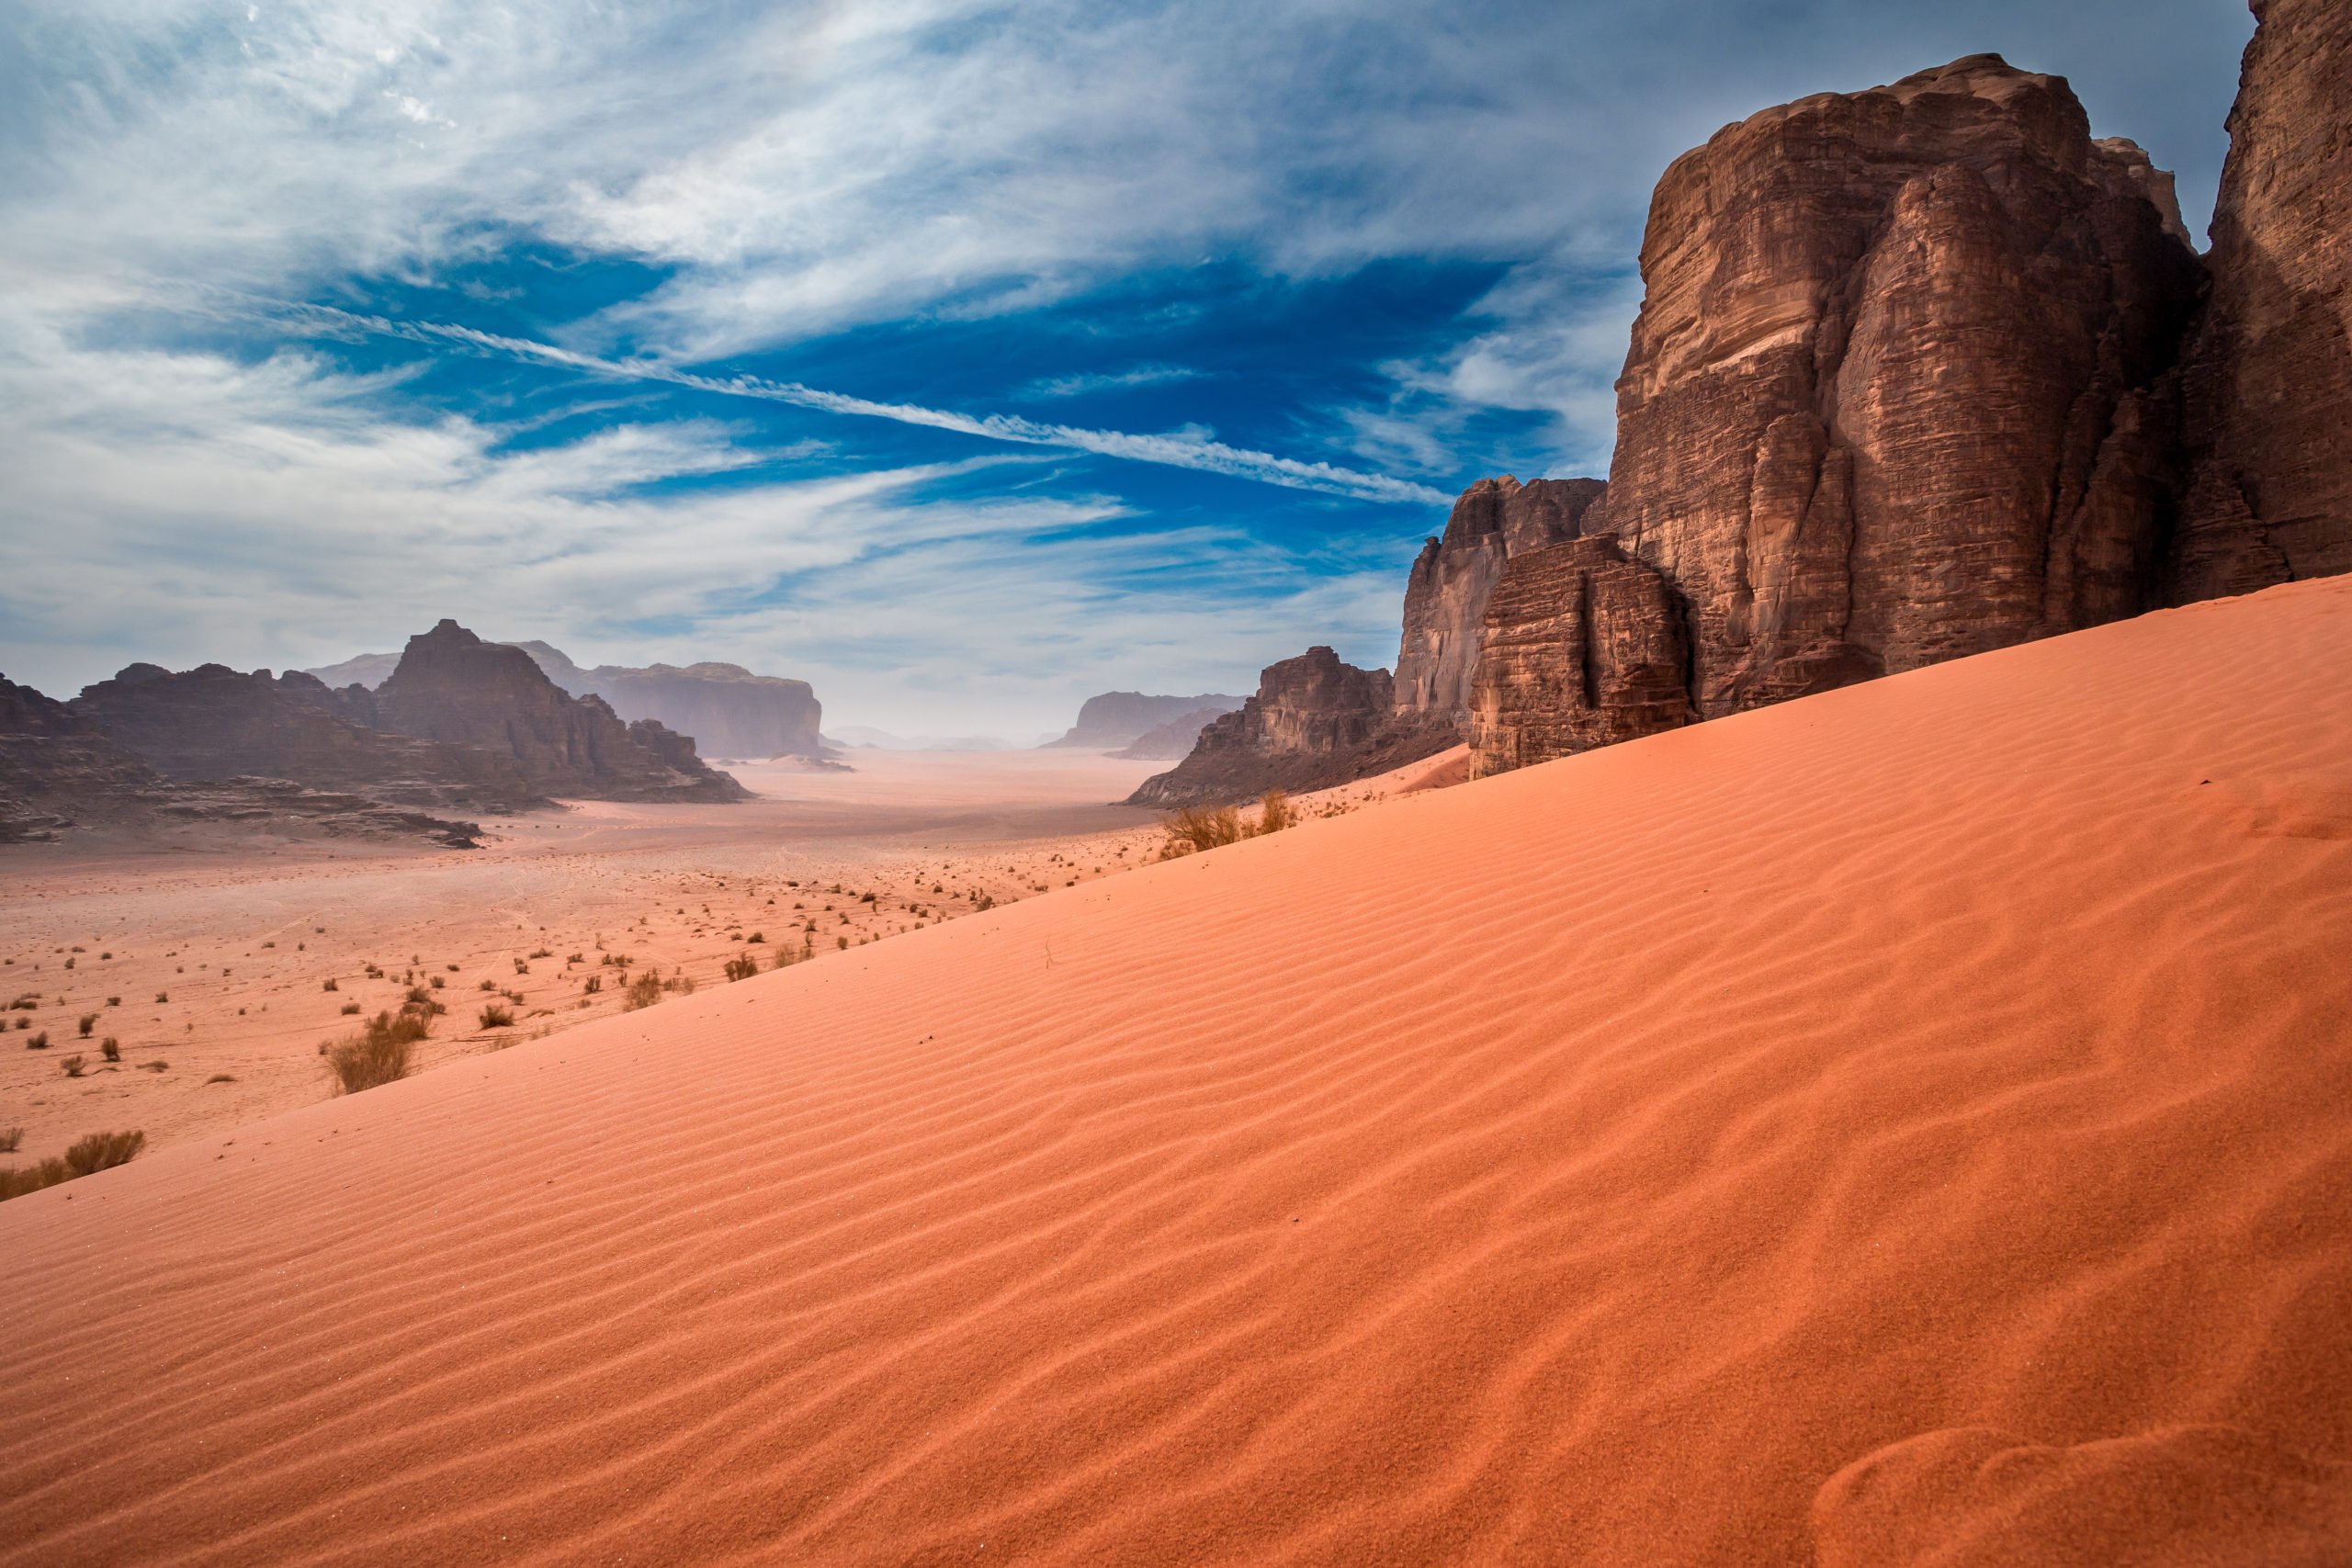 Explore The Beauty Of Wadi Rum During A Jeep Safari On The On The Petra And Wadi Rum 3 Day Tour From Aqaba